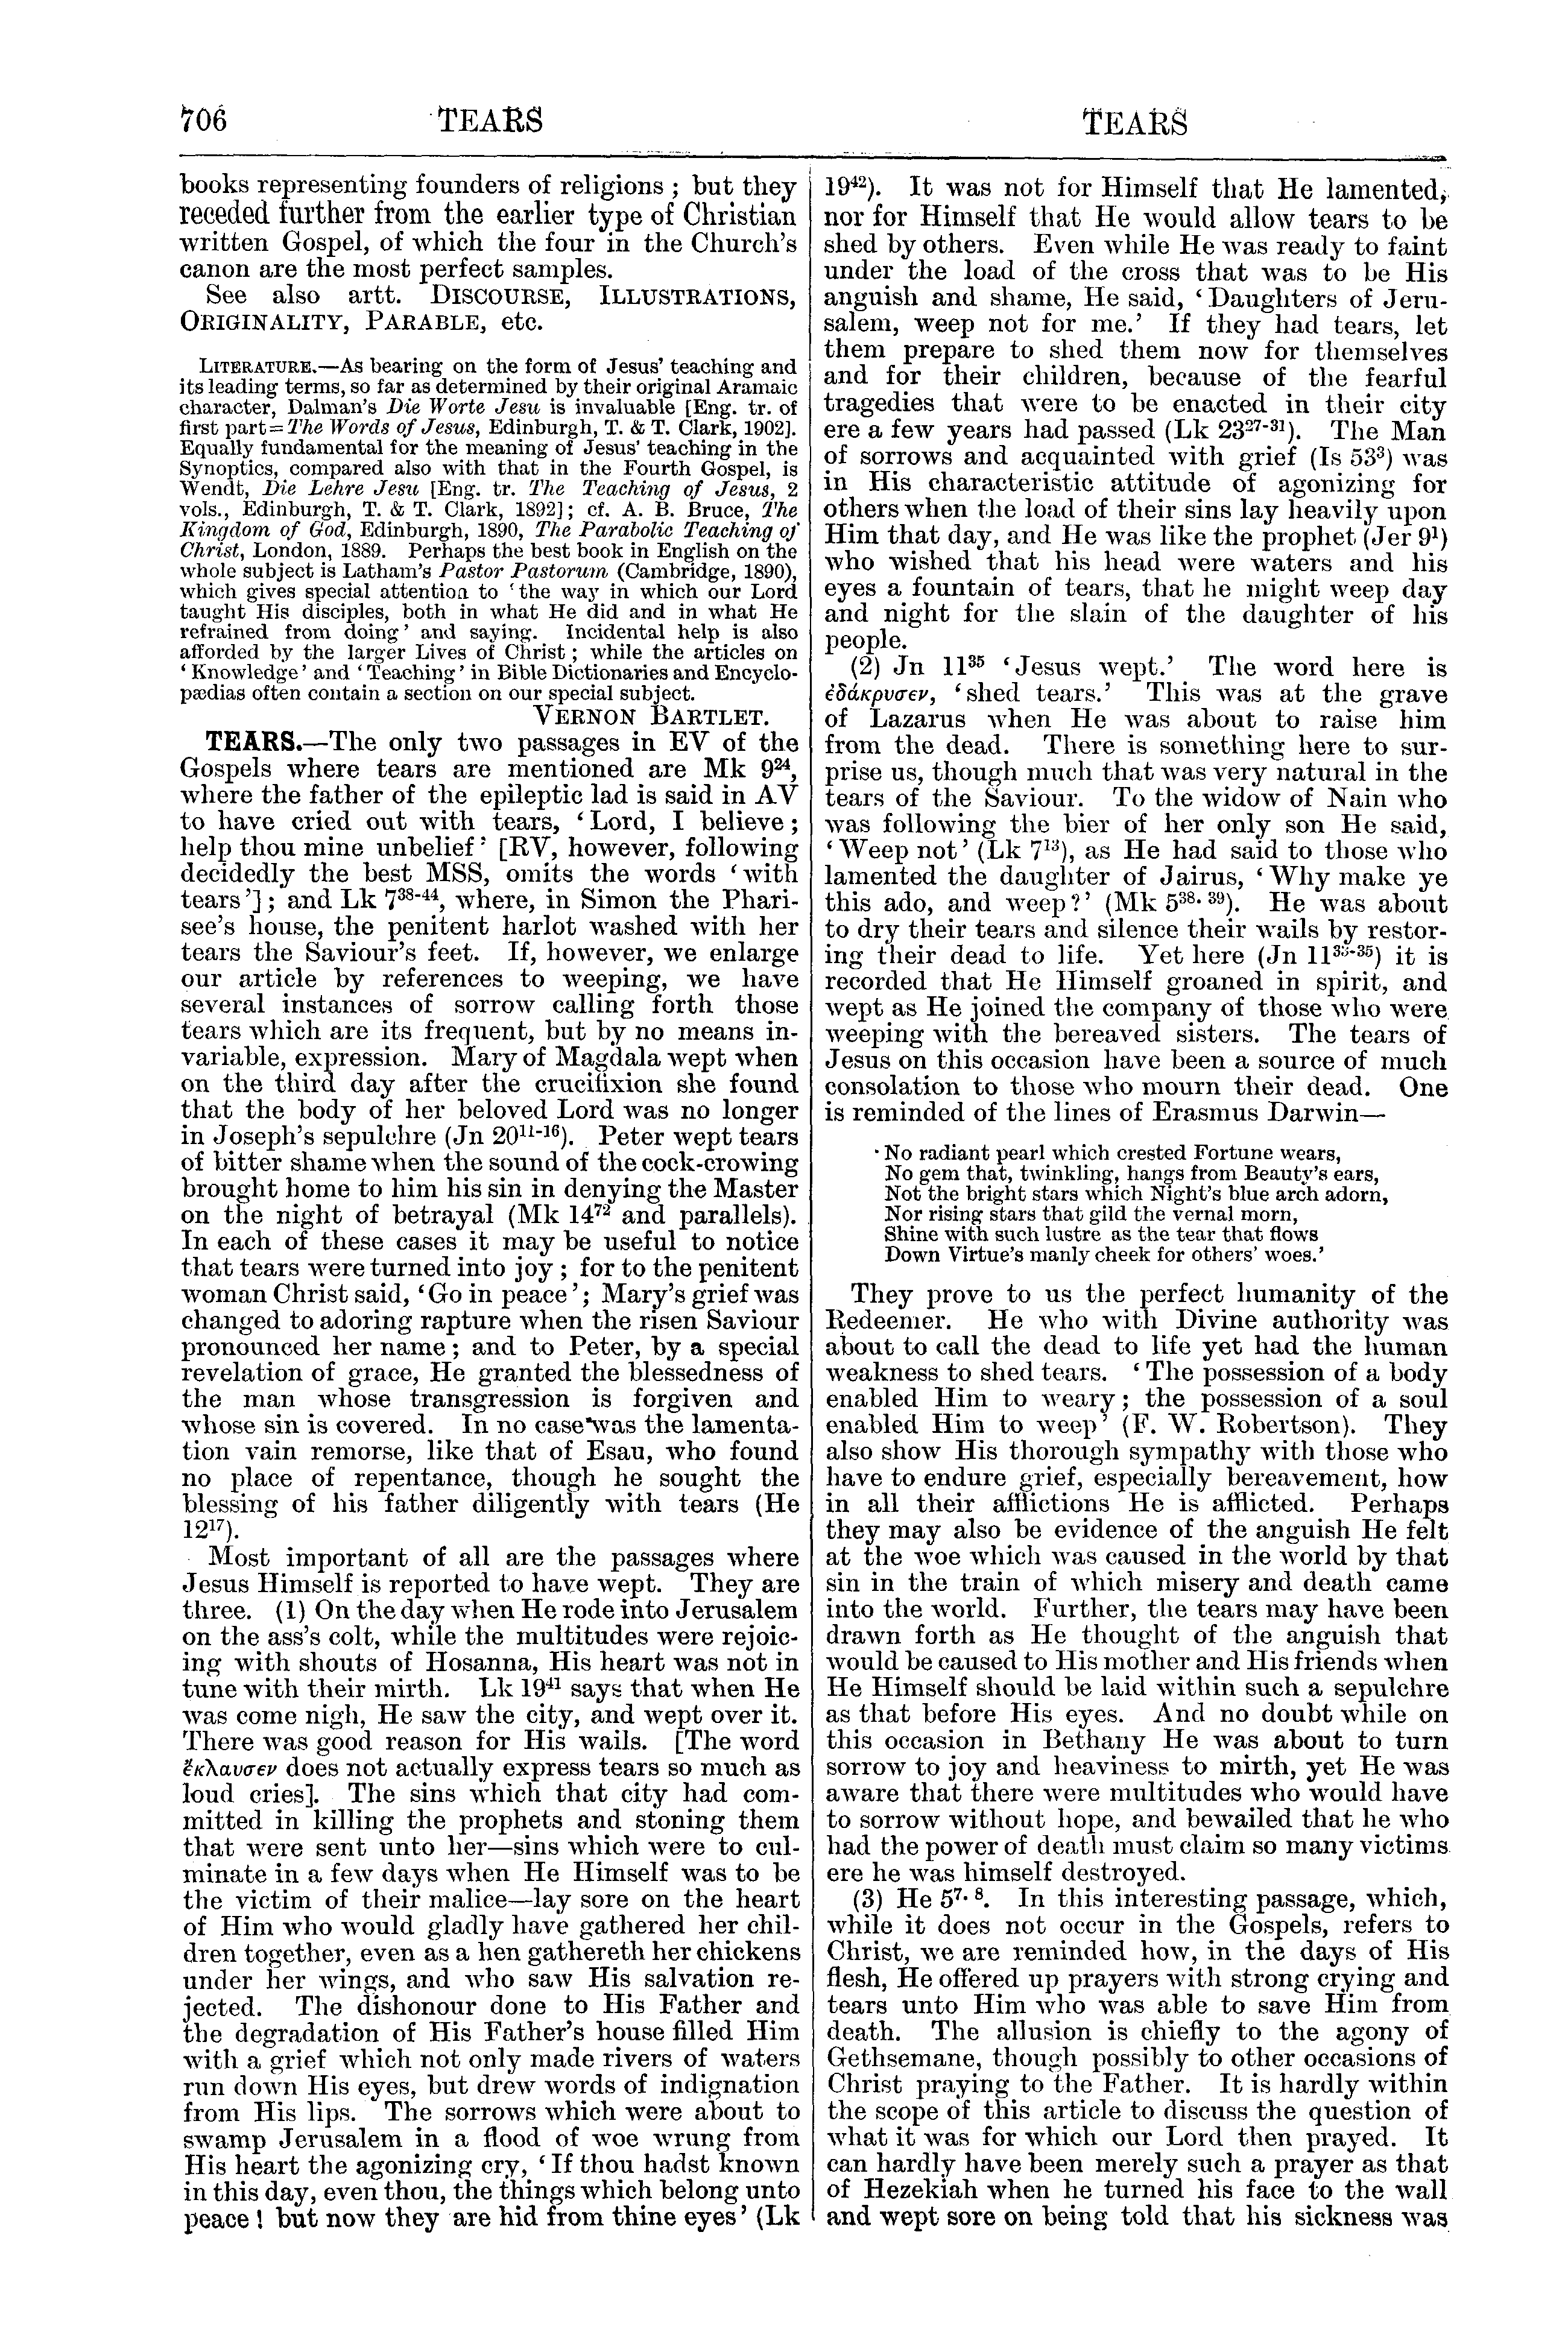 Image of page 706